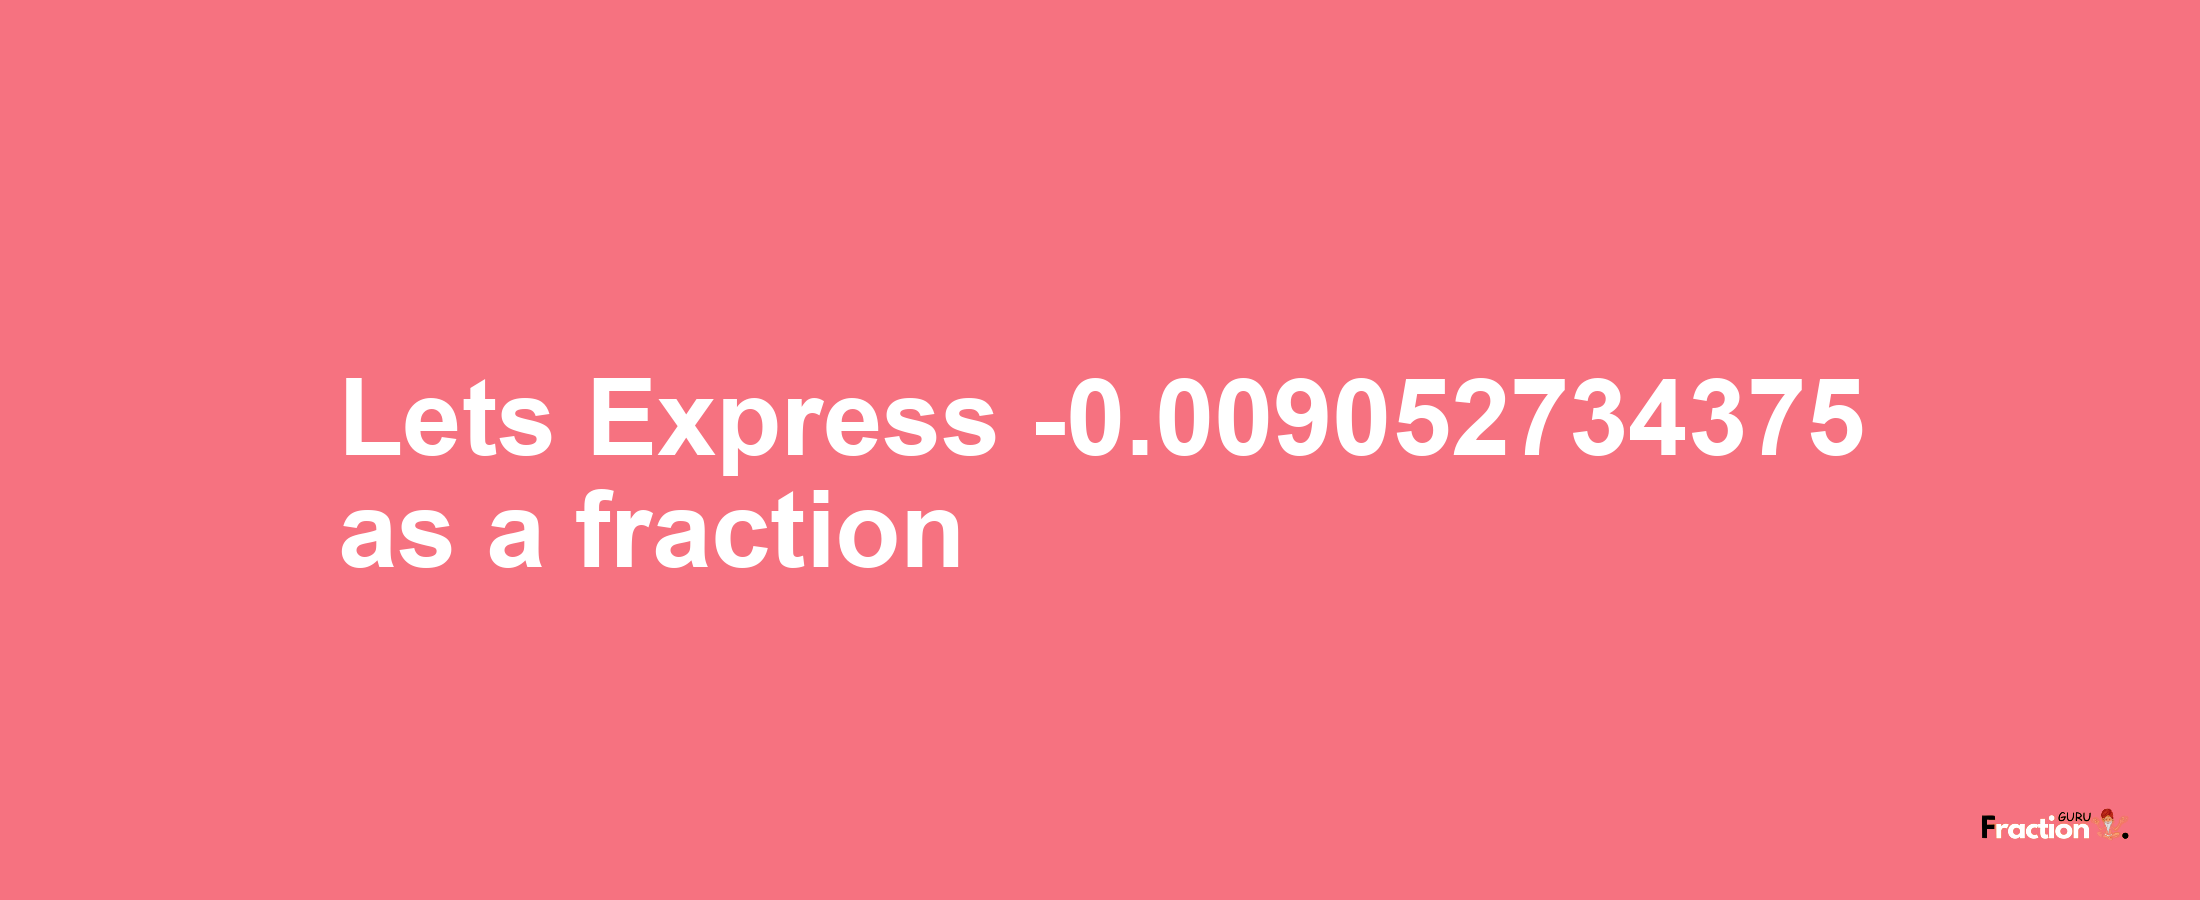 Lets Express -0.009052734375 as afraction